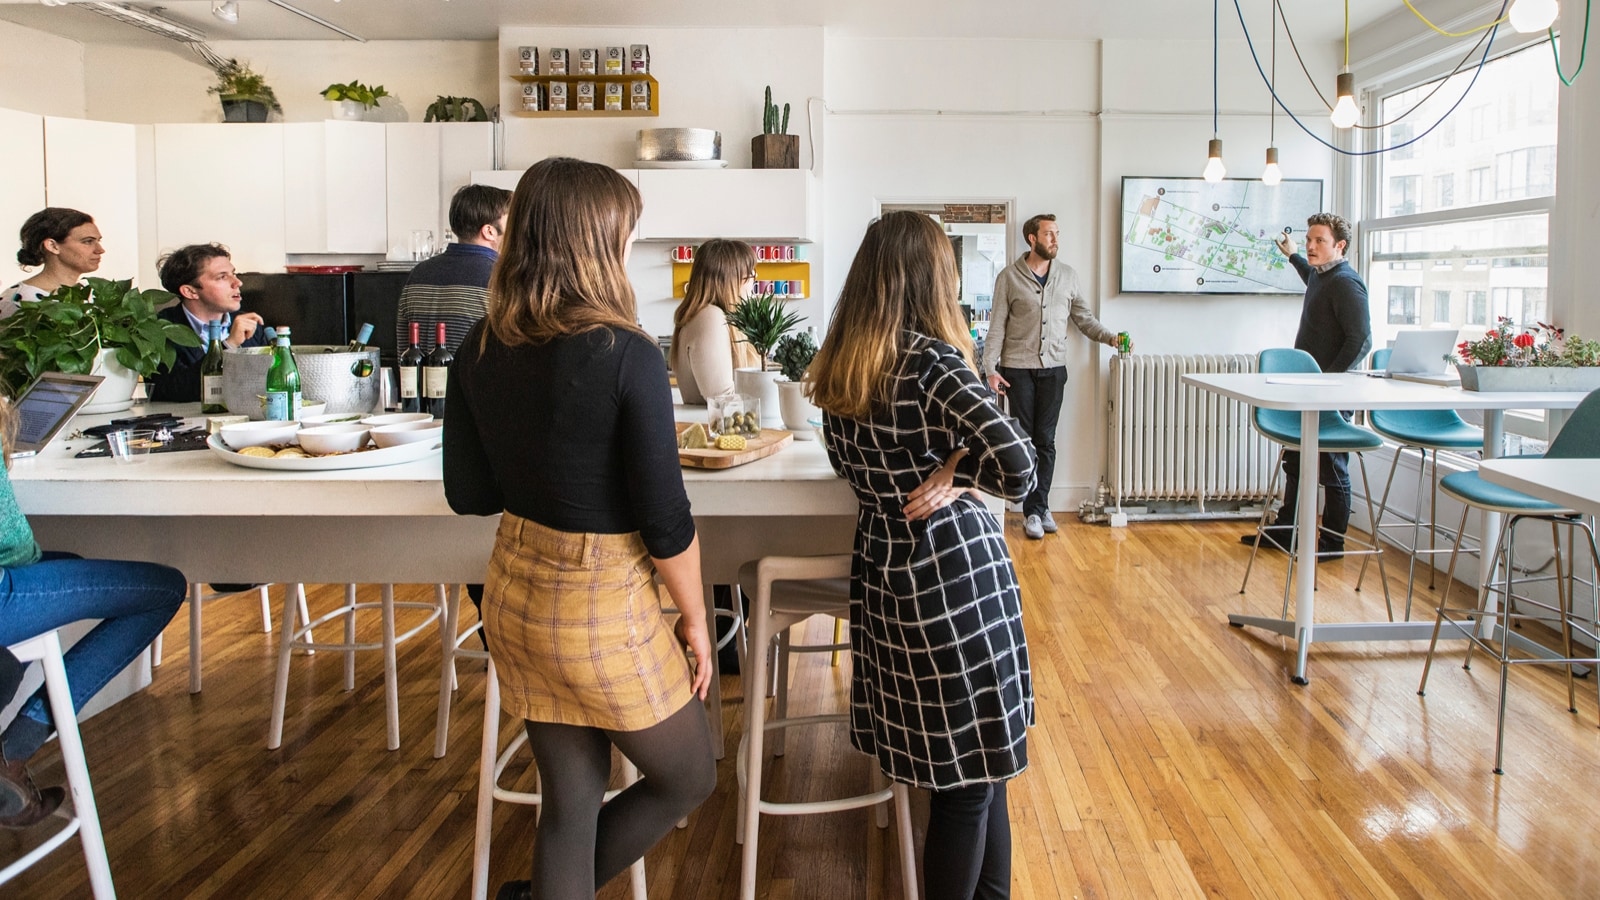 A group of people listening to a person address them in an open office kitchen space.